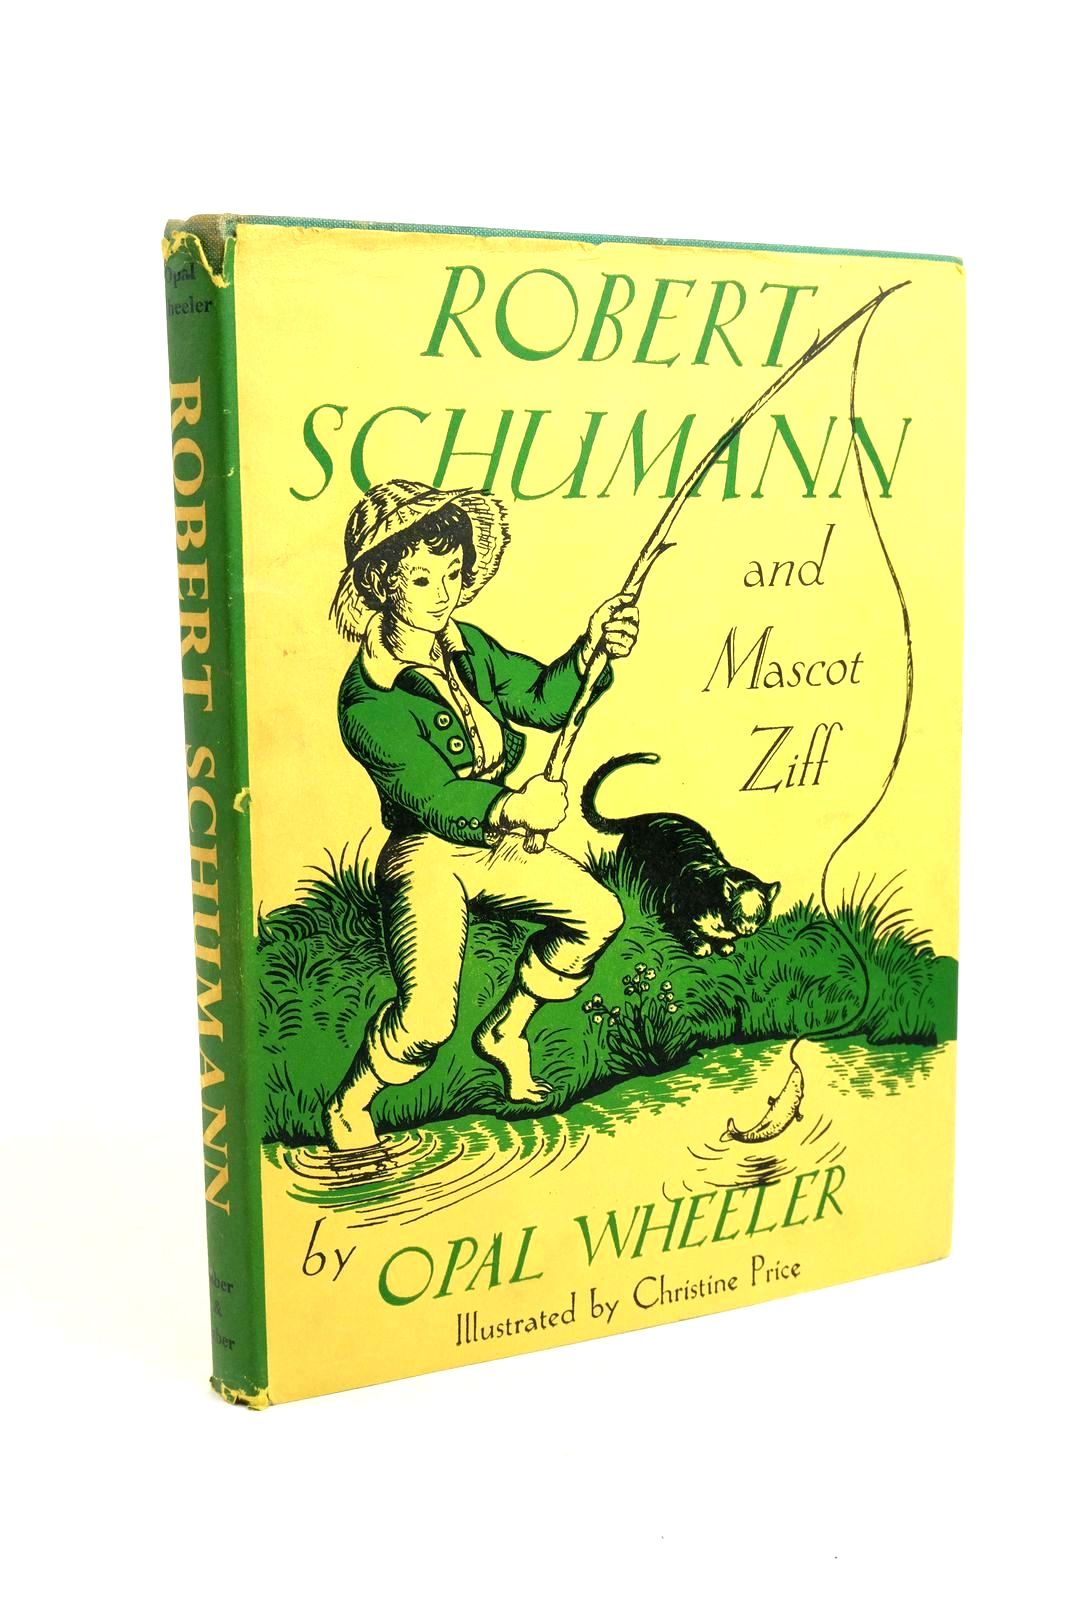 Photo of ROBERT SCHUMANN AND MASCOT ZIFF written by Wheeler, Opal illustrated by Price, Christine published by Faber &amp; Faber Limited (STOCK CODE: 1322123)  for sale by Stella & Rose's Books